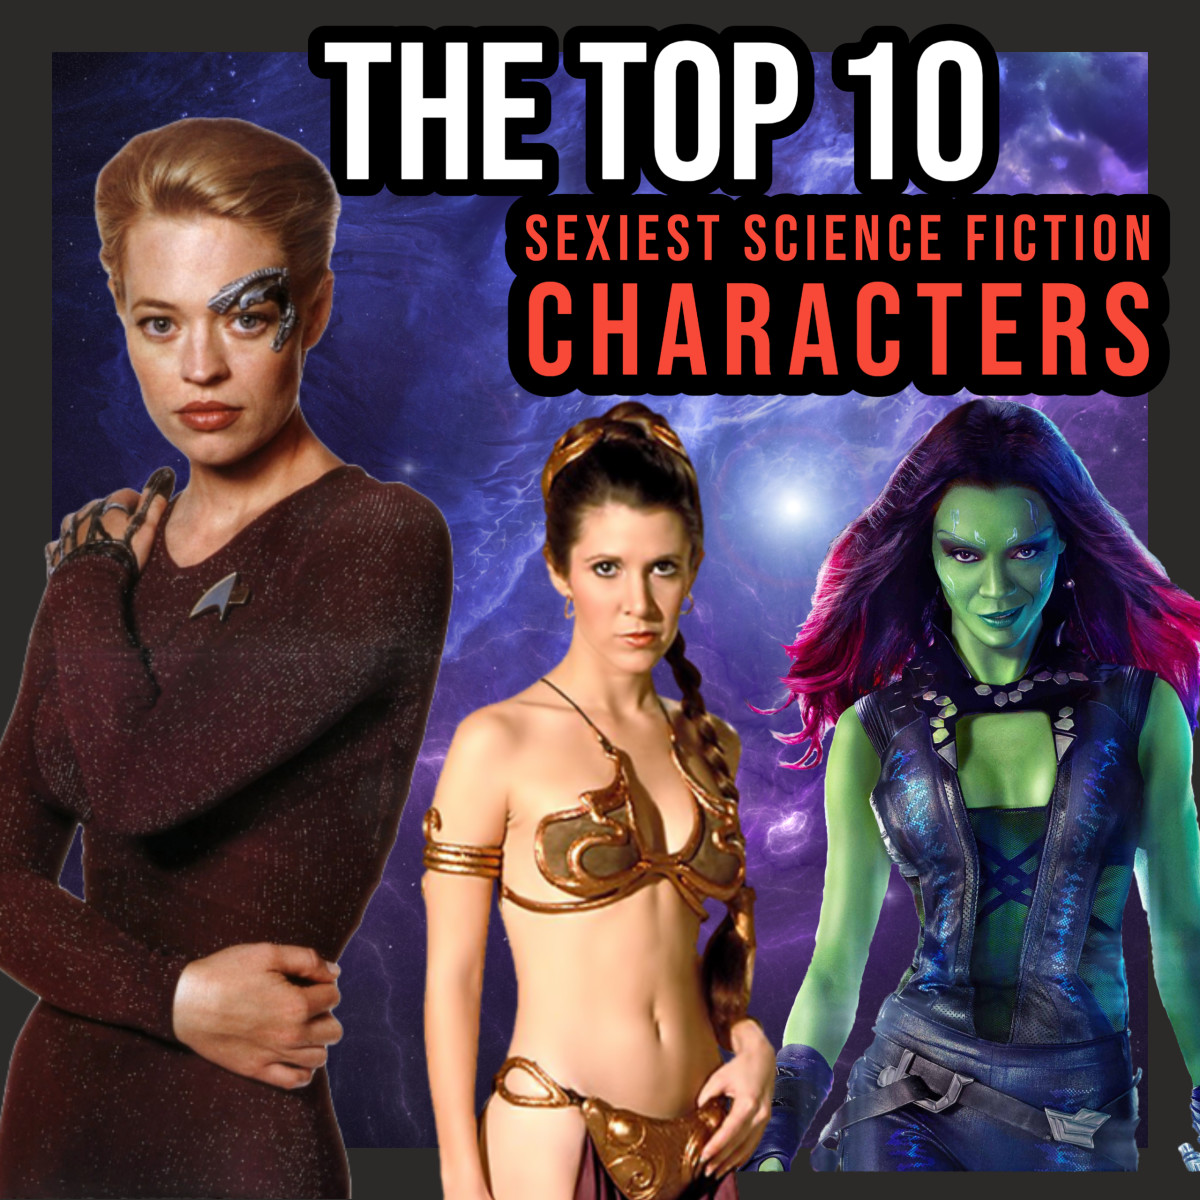 From Gamora to Princess Leia, this article ranks the 10 sexiest science fiction characters of all time. Did your favorite character make our final 10 list below? Read on to find out!